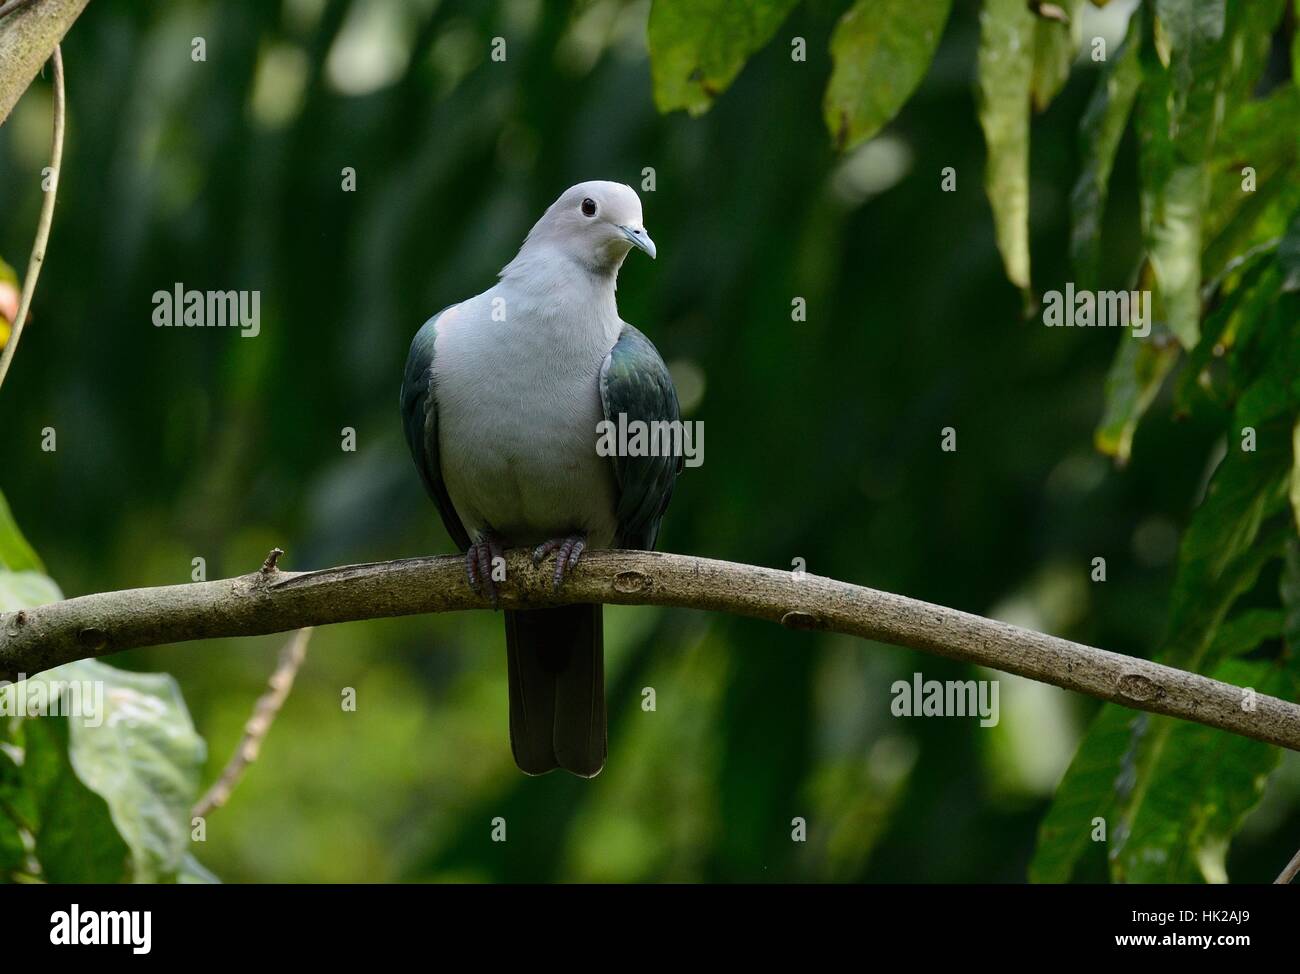 Green Imperial Pigeon (Ducula aenea) standing on branch Stock Photo